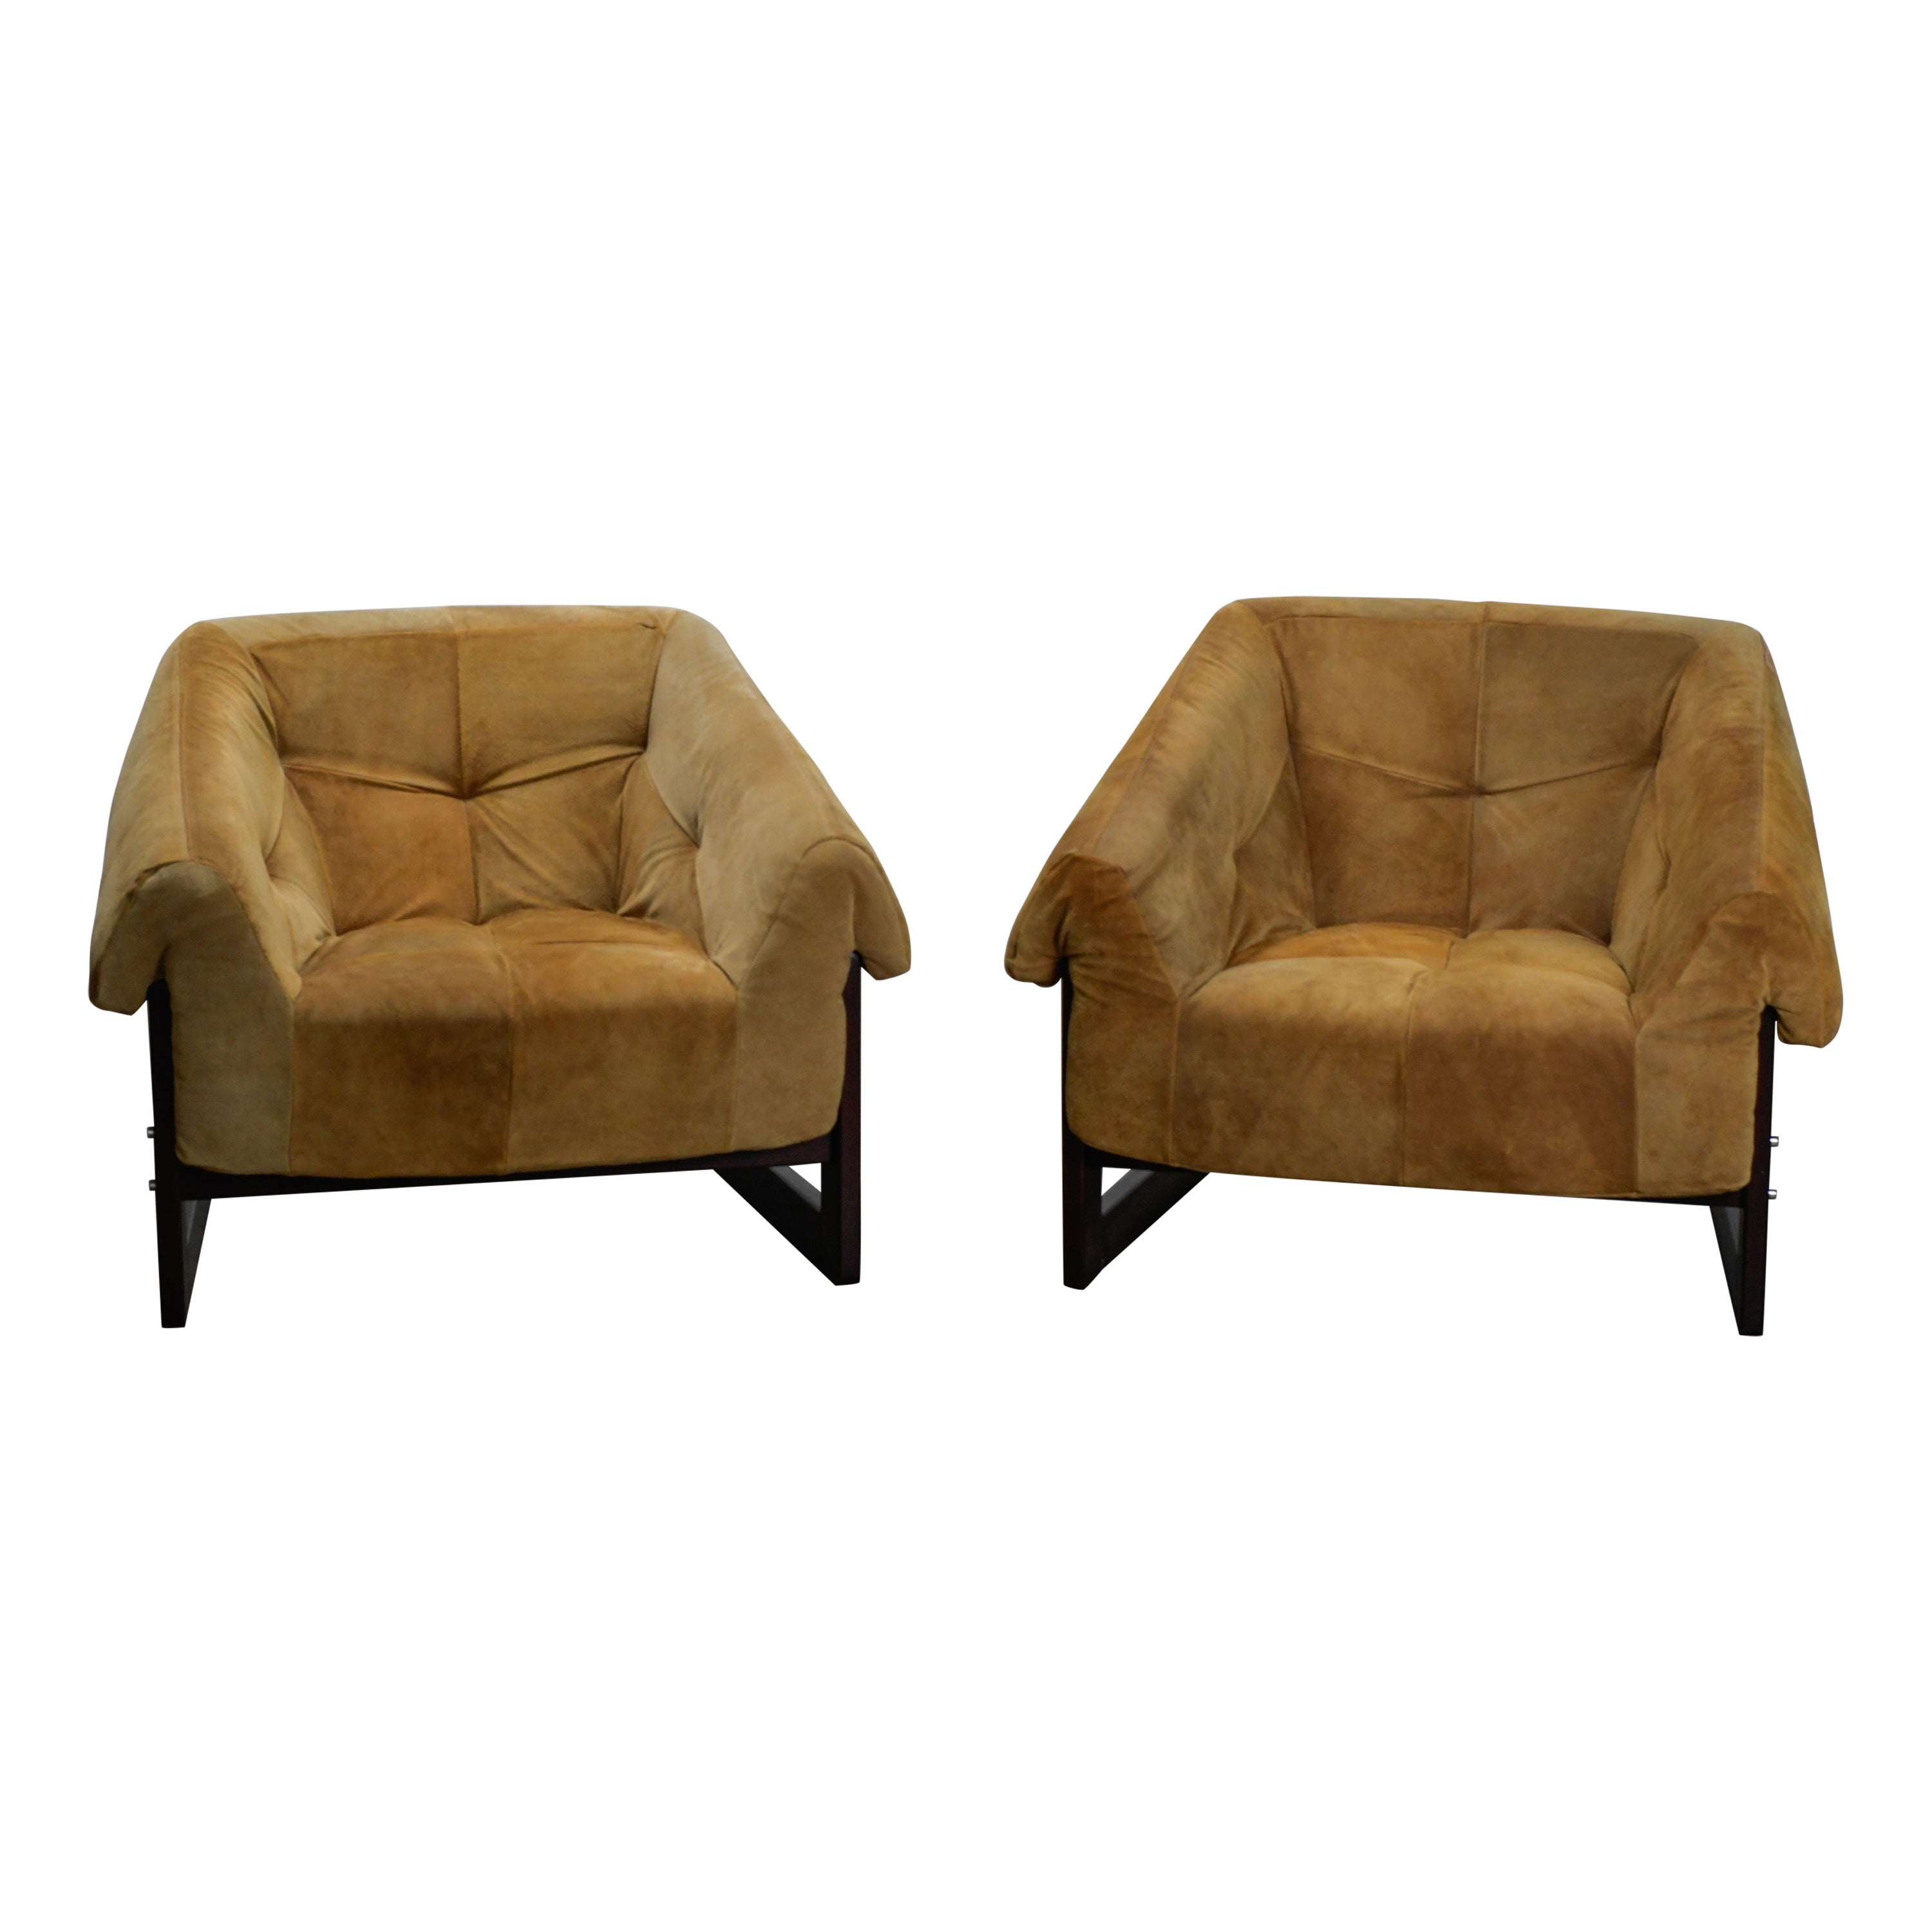 Percival Lafer Lounge Chairs 